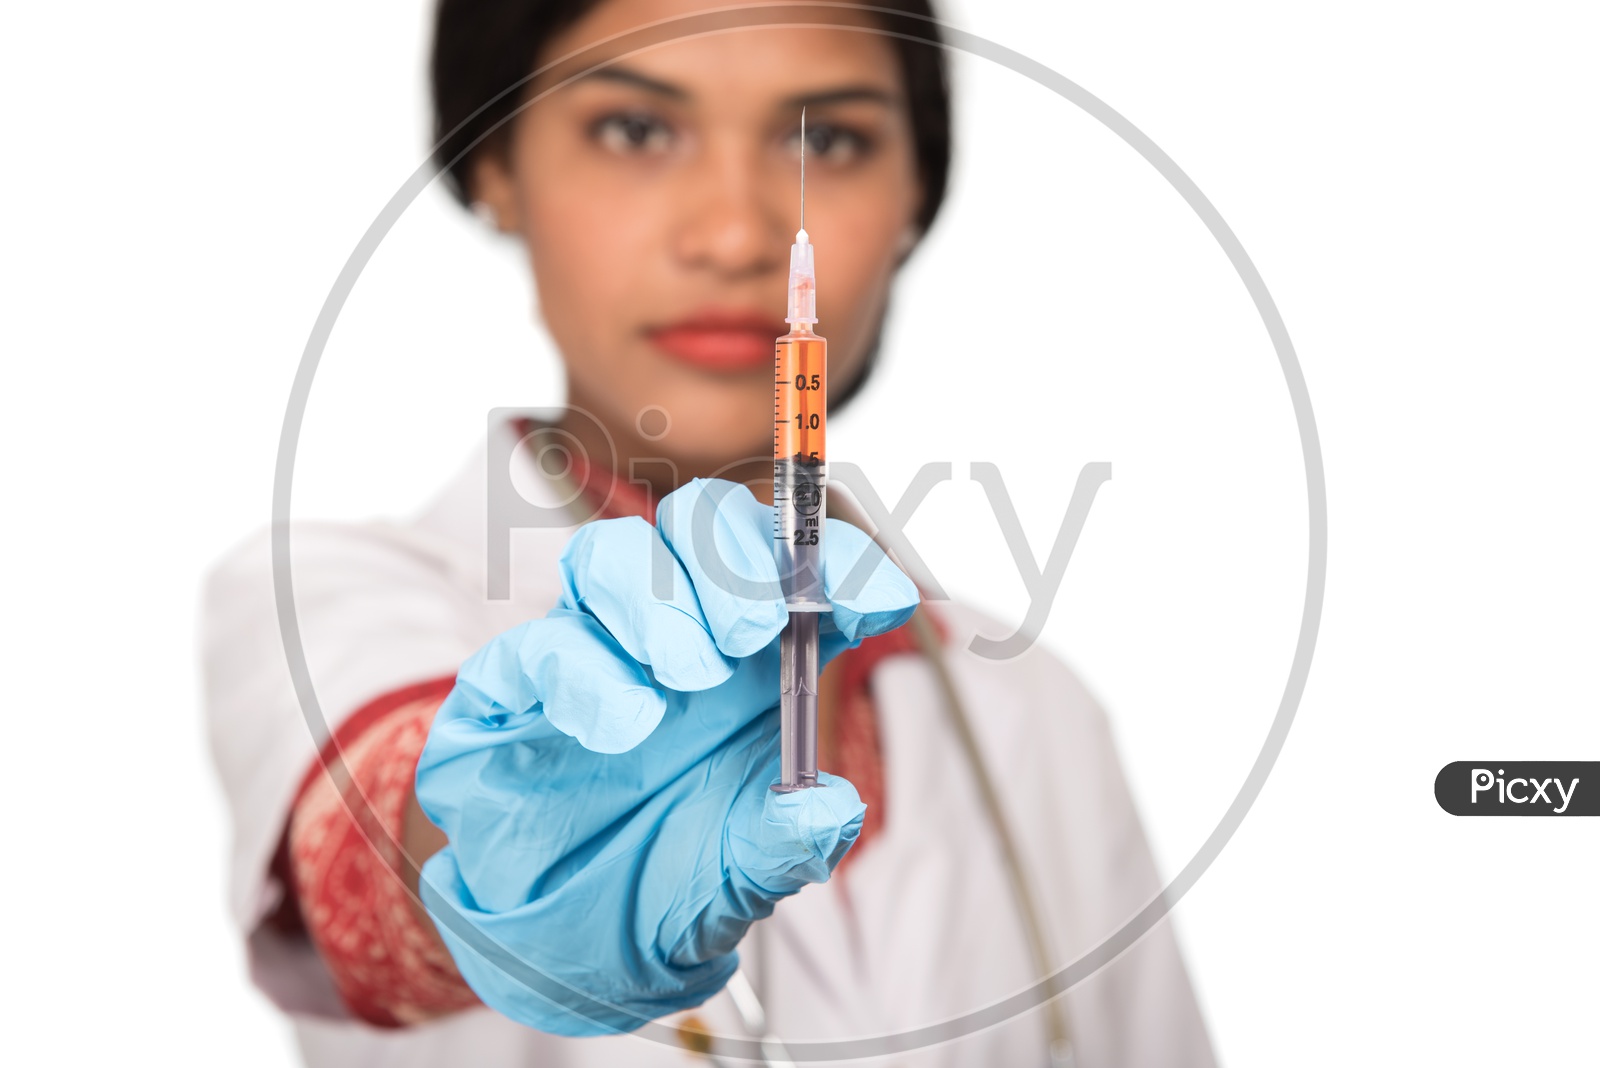 Indian Female Doctor with a loaded syringe